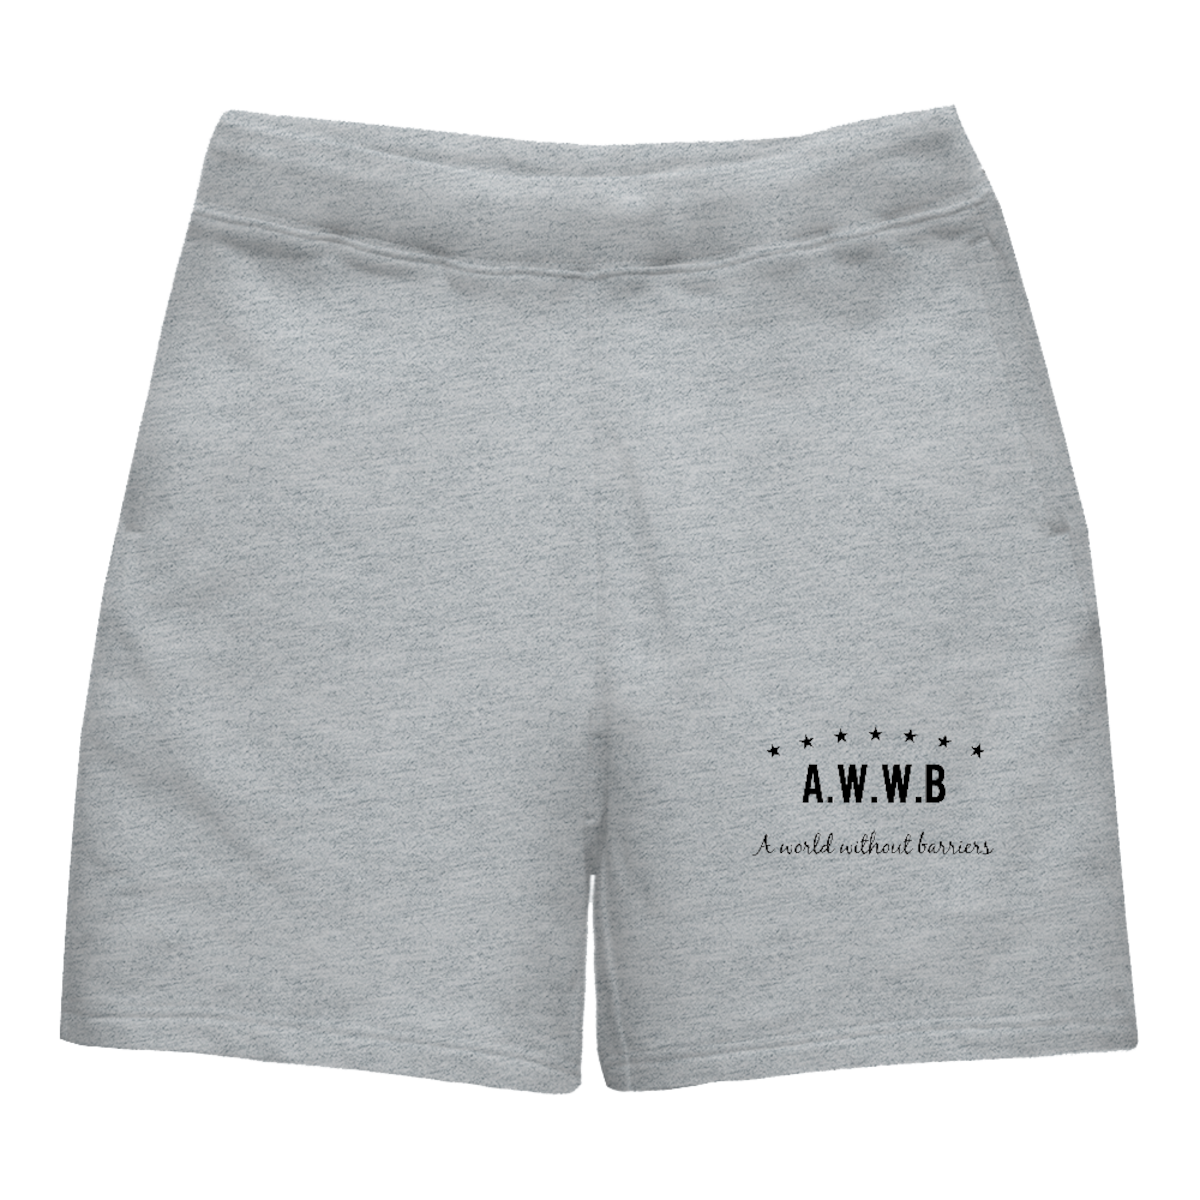 A.W.W.B LOGO SWEAT HALF PANTS | A.W.W.B / A world without barriers